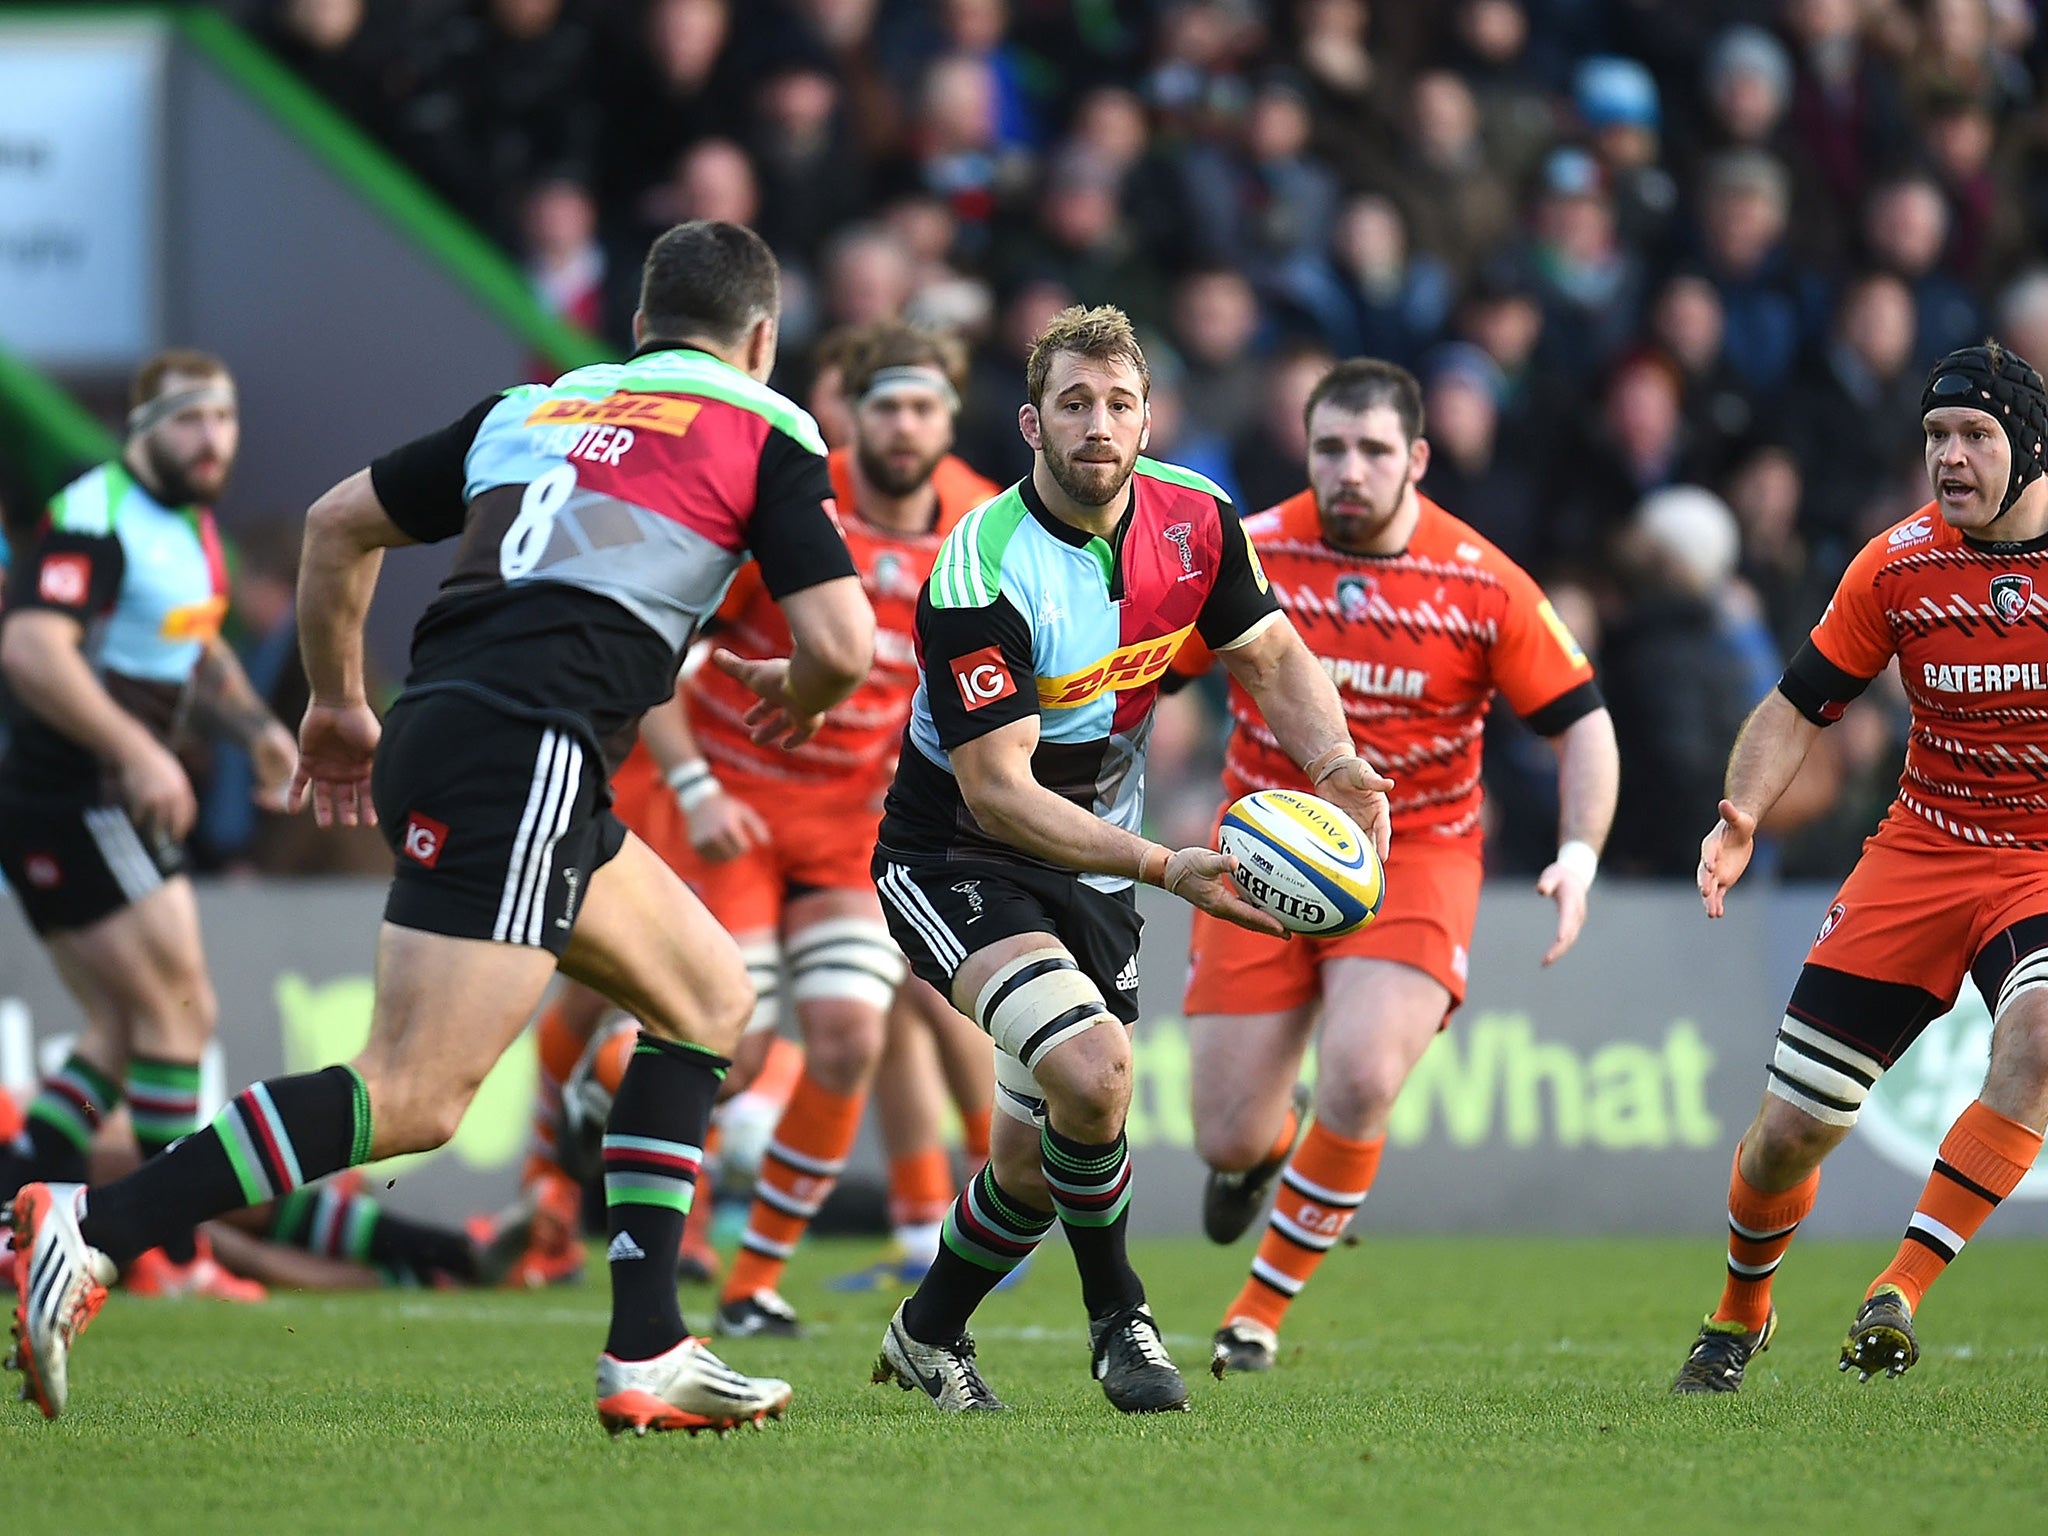 Chris Robshaw is back in action with Harlequins at Wembley